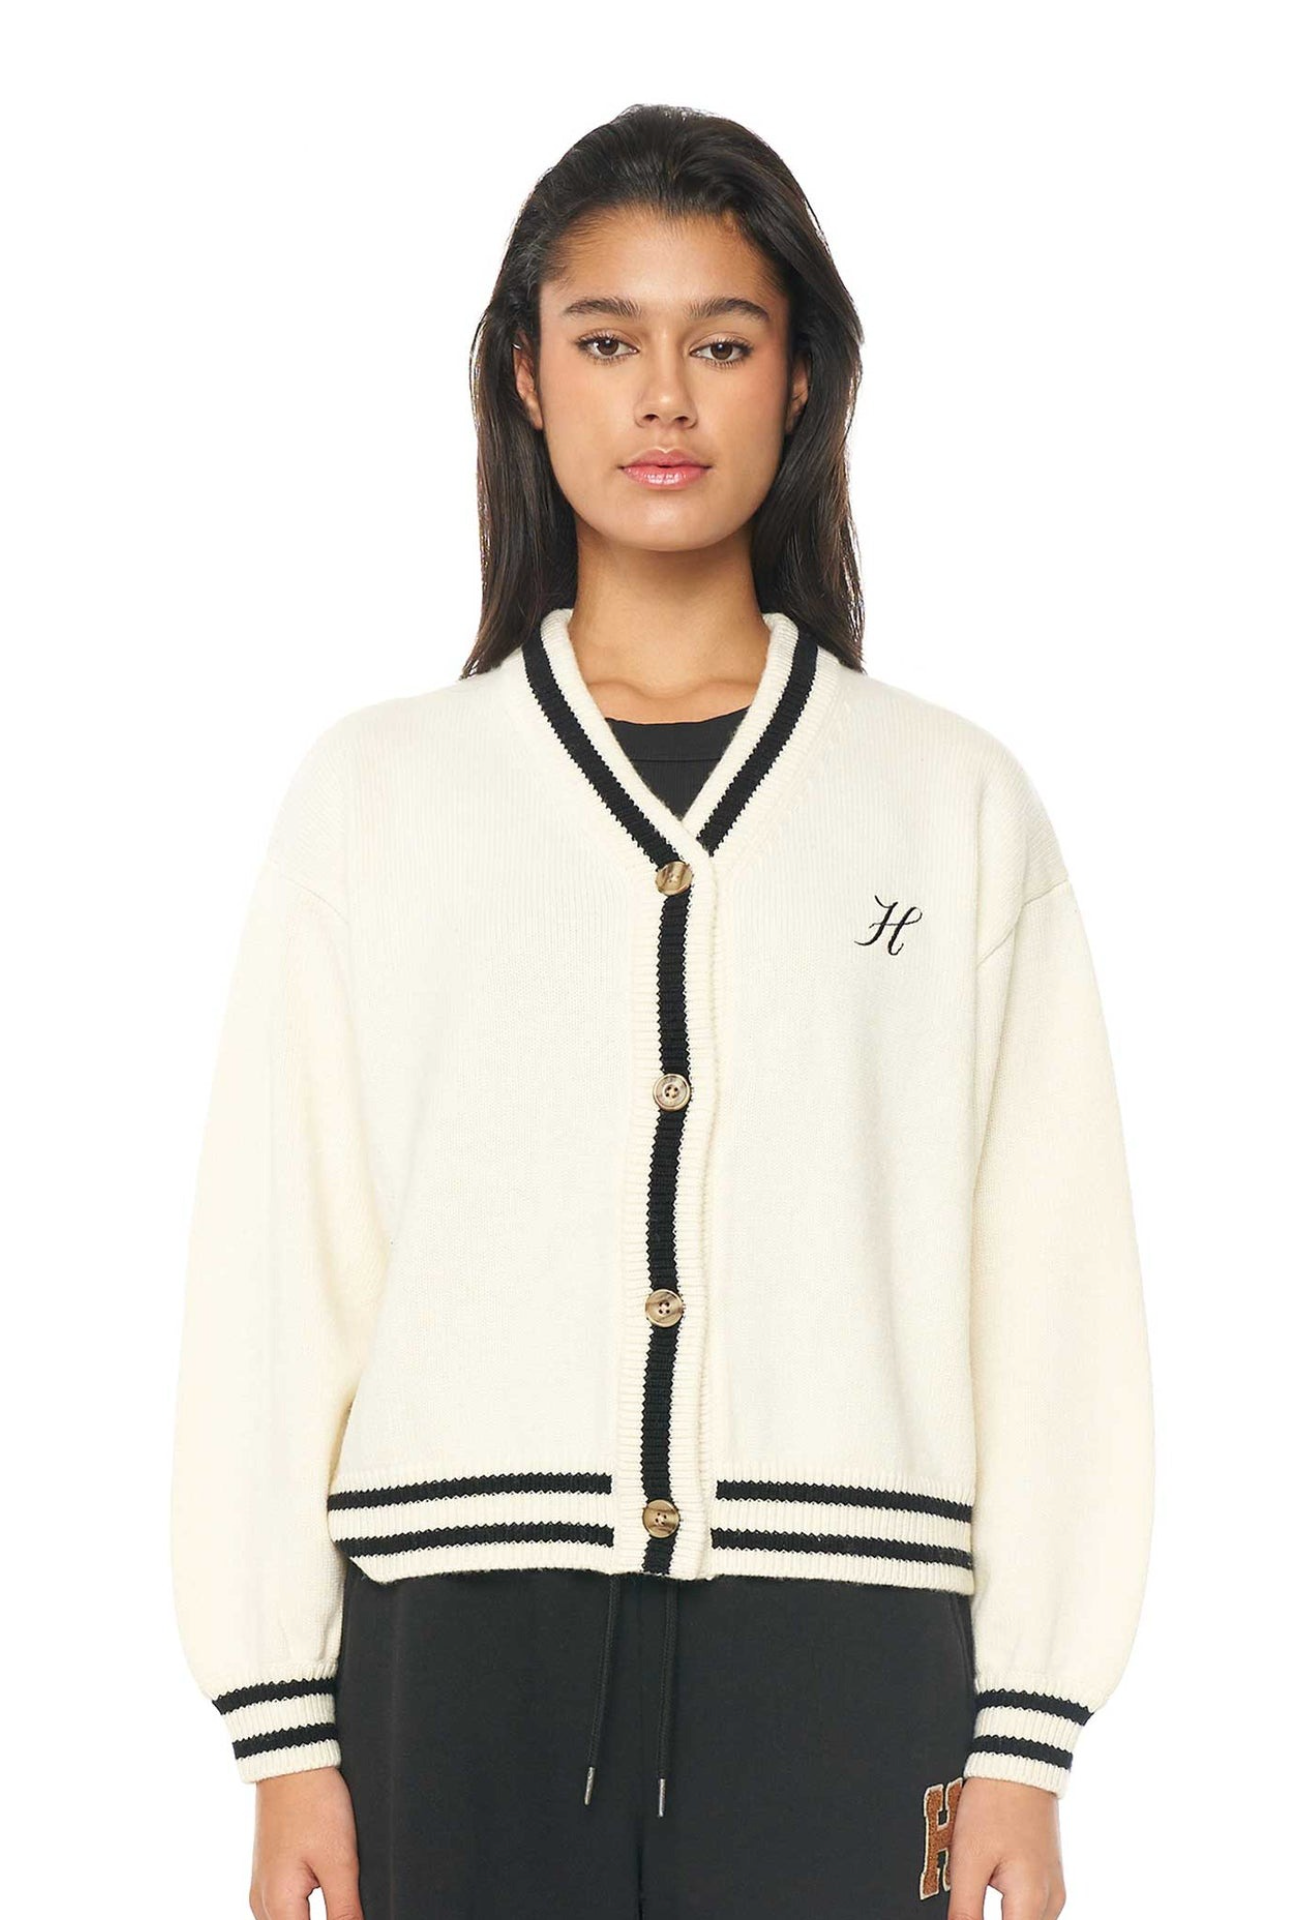 HUFFER ACES KNIT CARDIGAN - PUTTY - THE VOGUE STORE